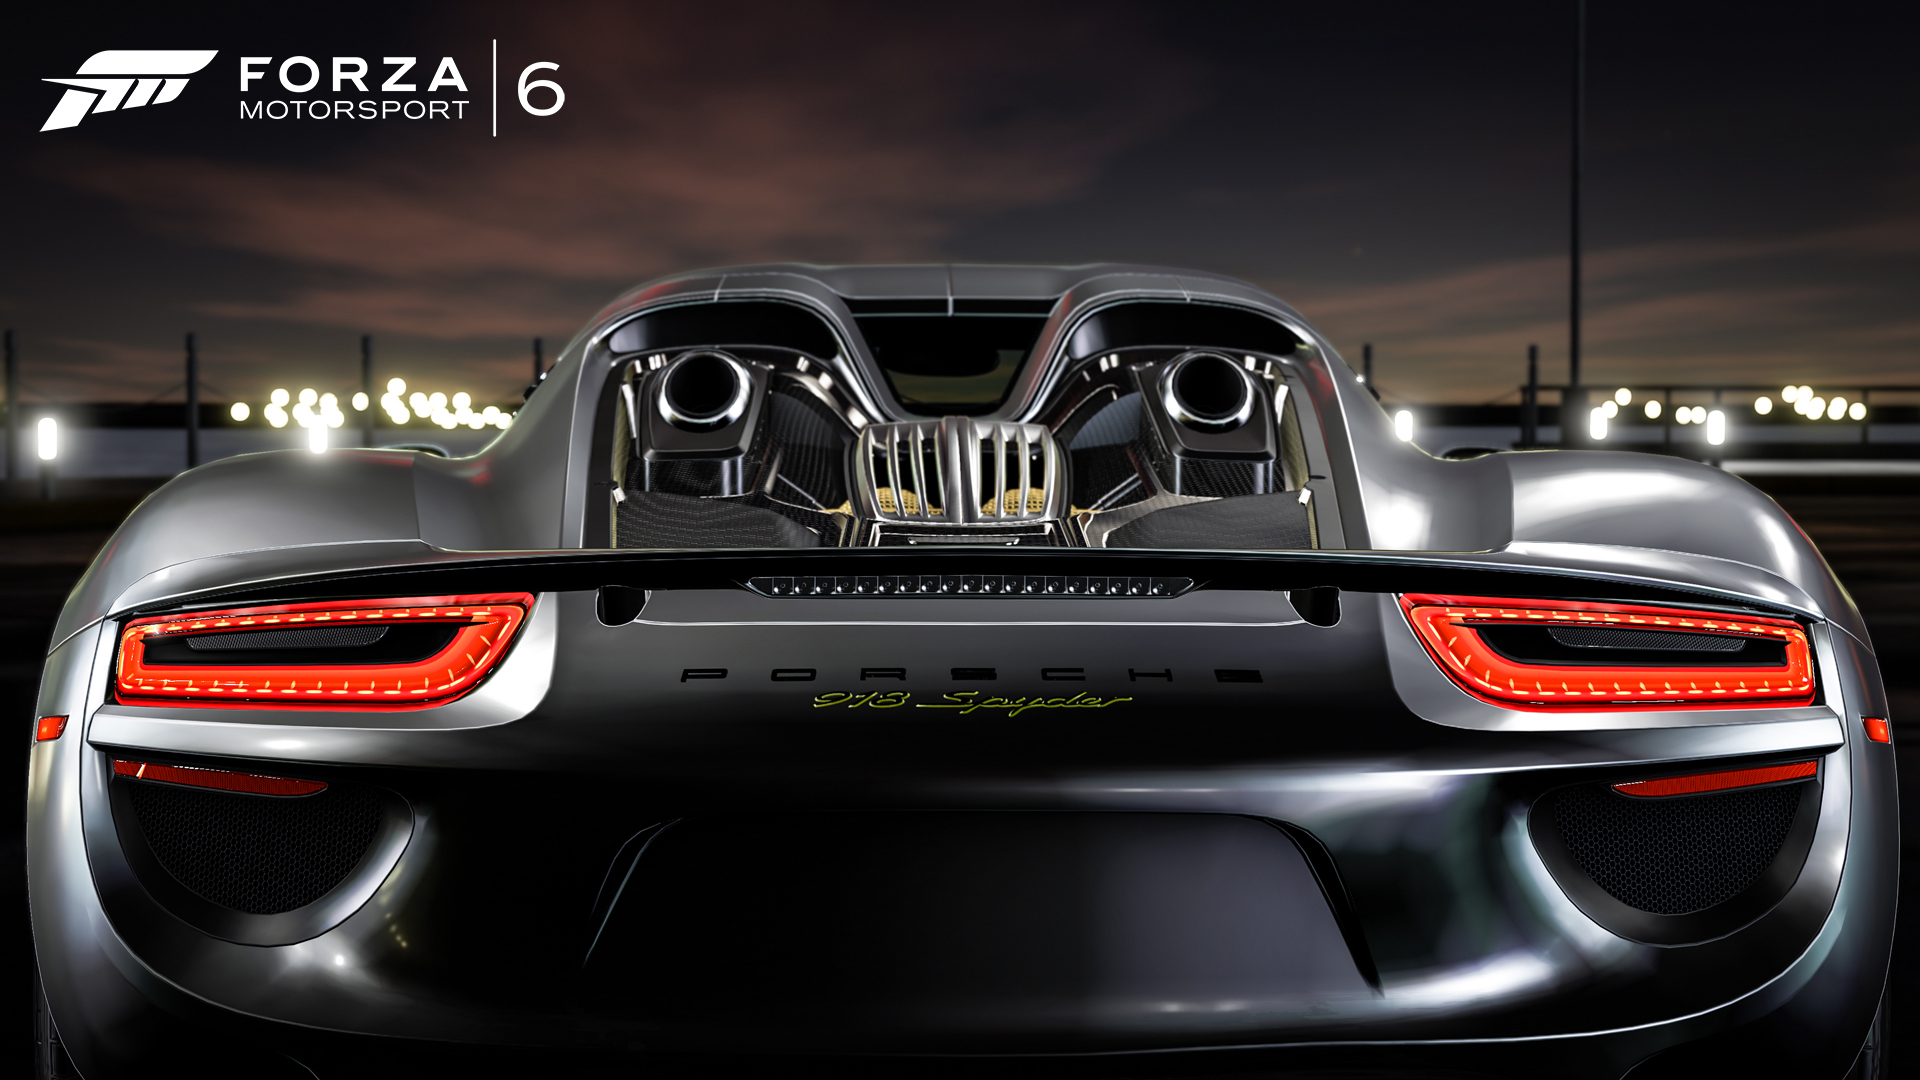 Amazing Forza Motorsport 6 Pictures & Backgrounds